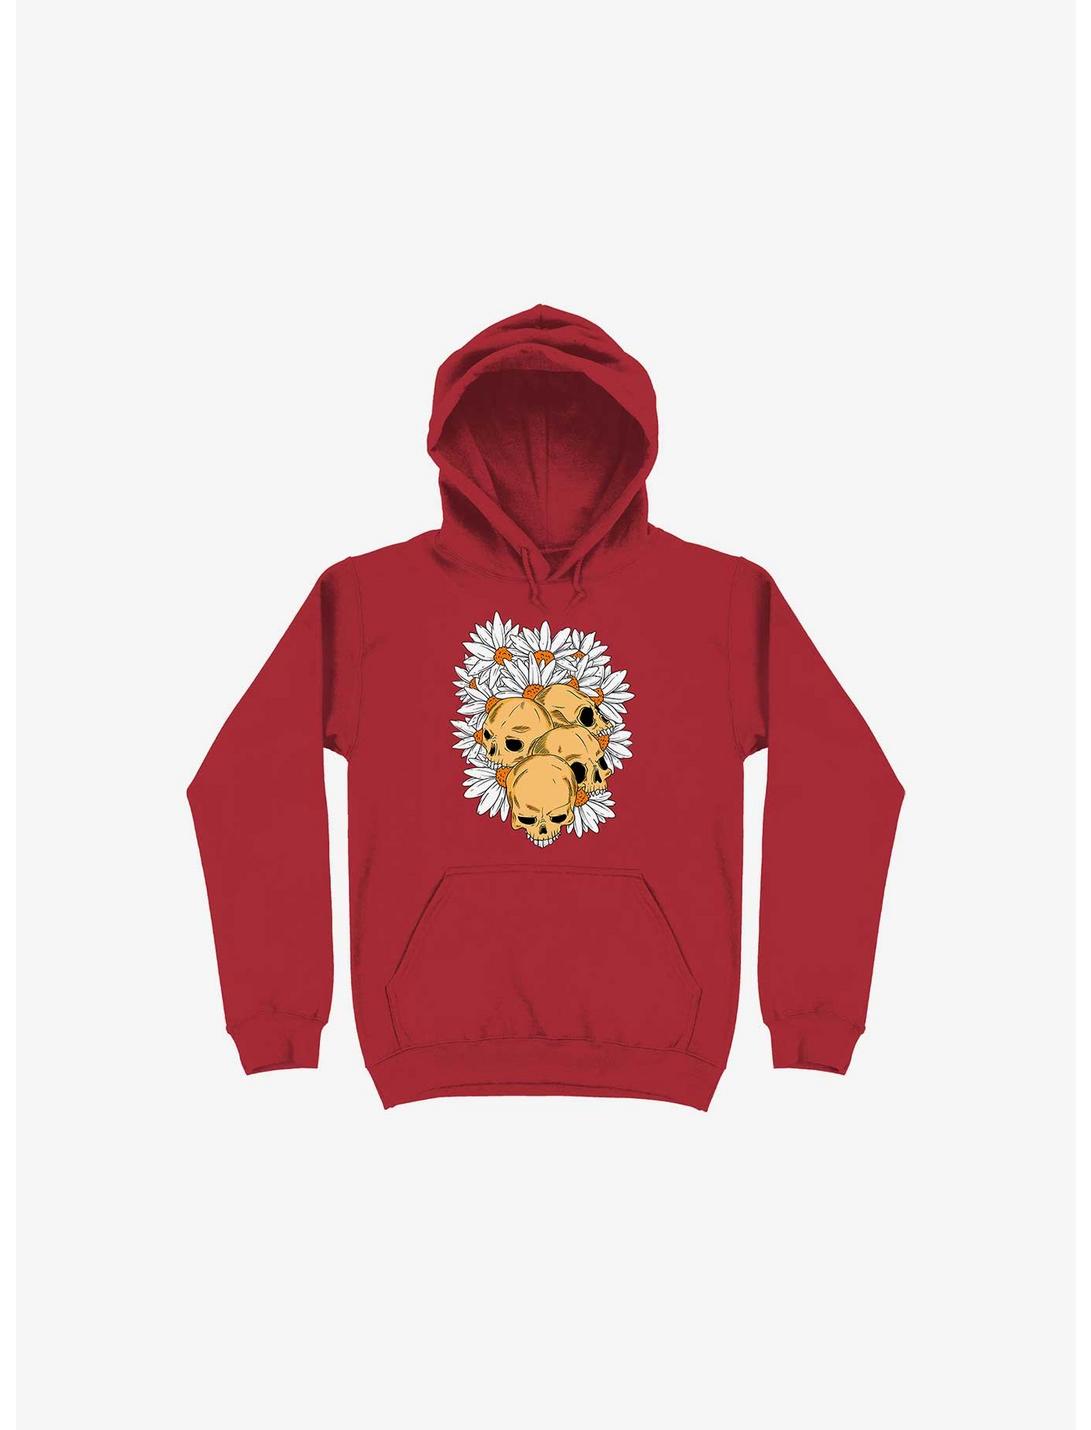 Skull Have Chance Red Hoodie, RED, hi-res